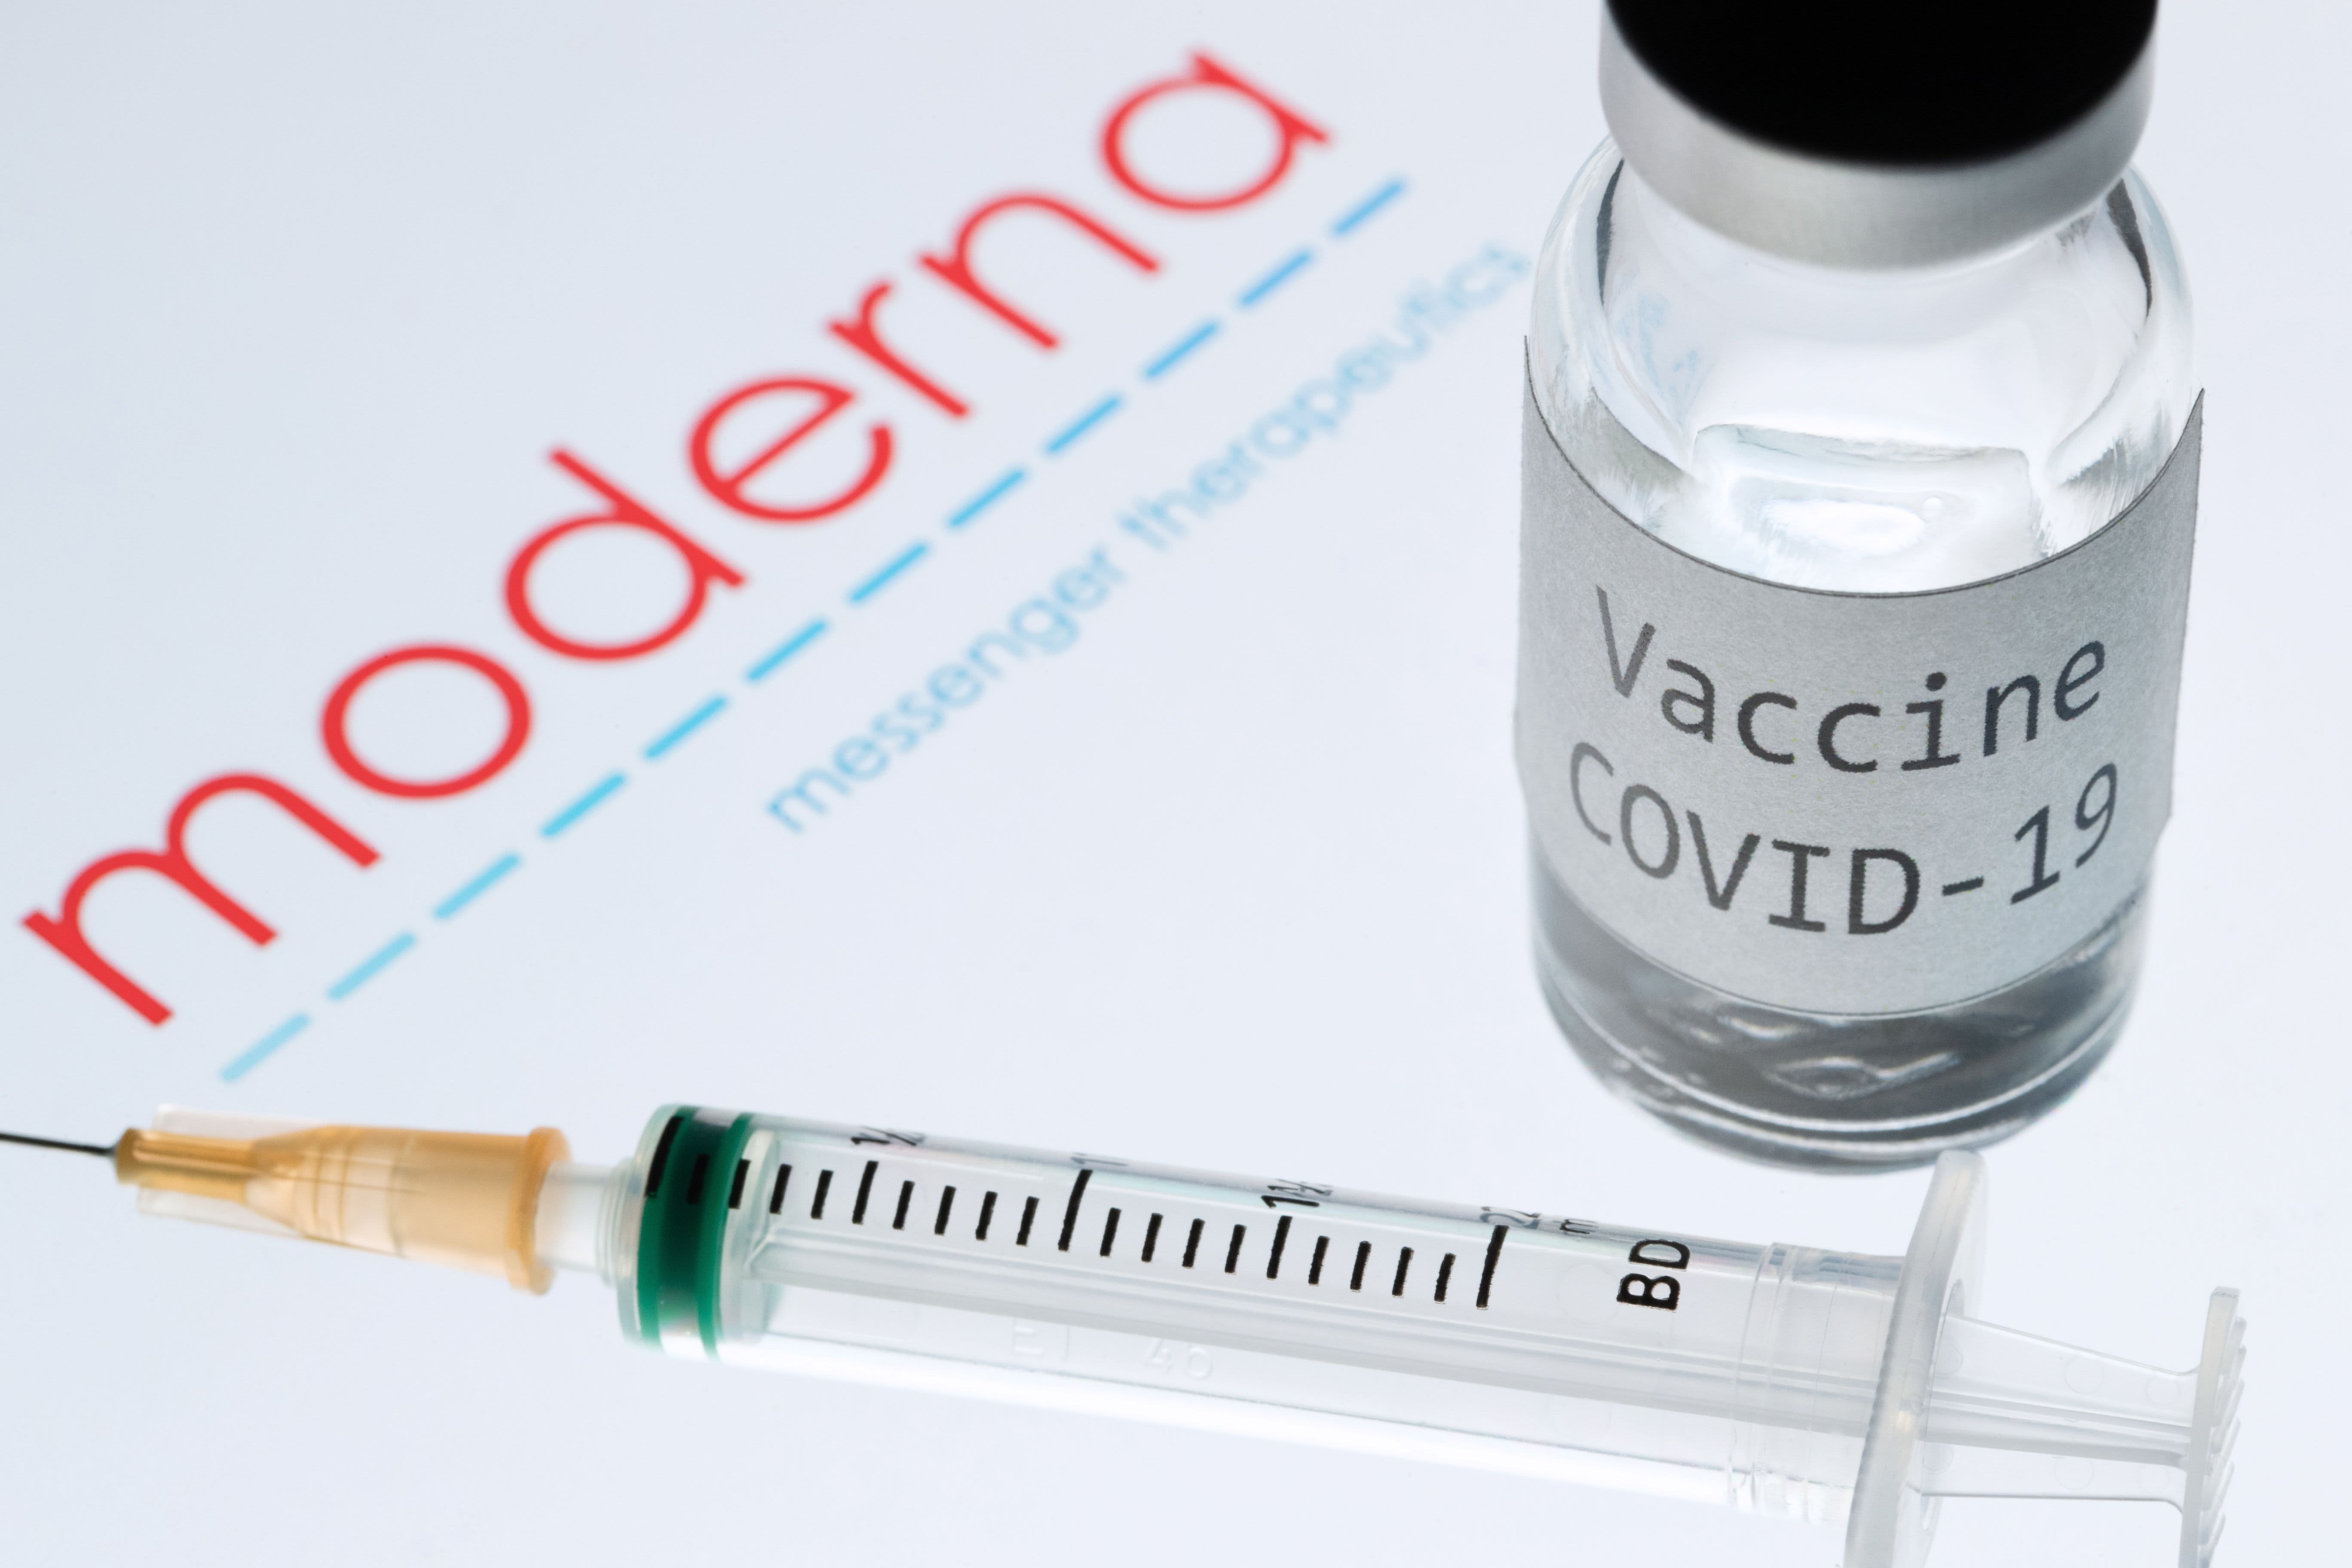 WHO panel to issue recommendations on Moderna vaccine next week